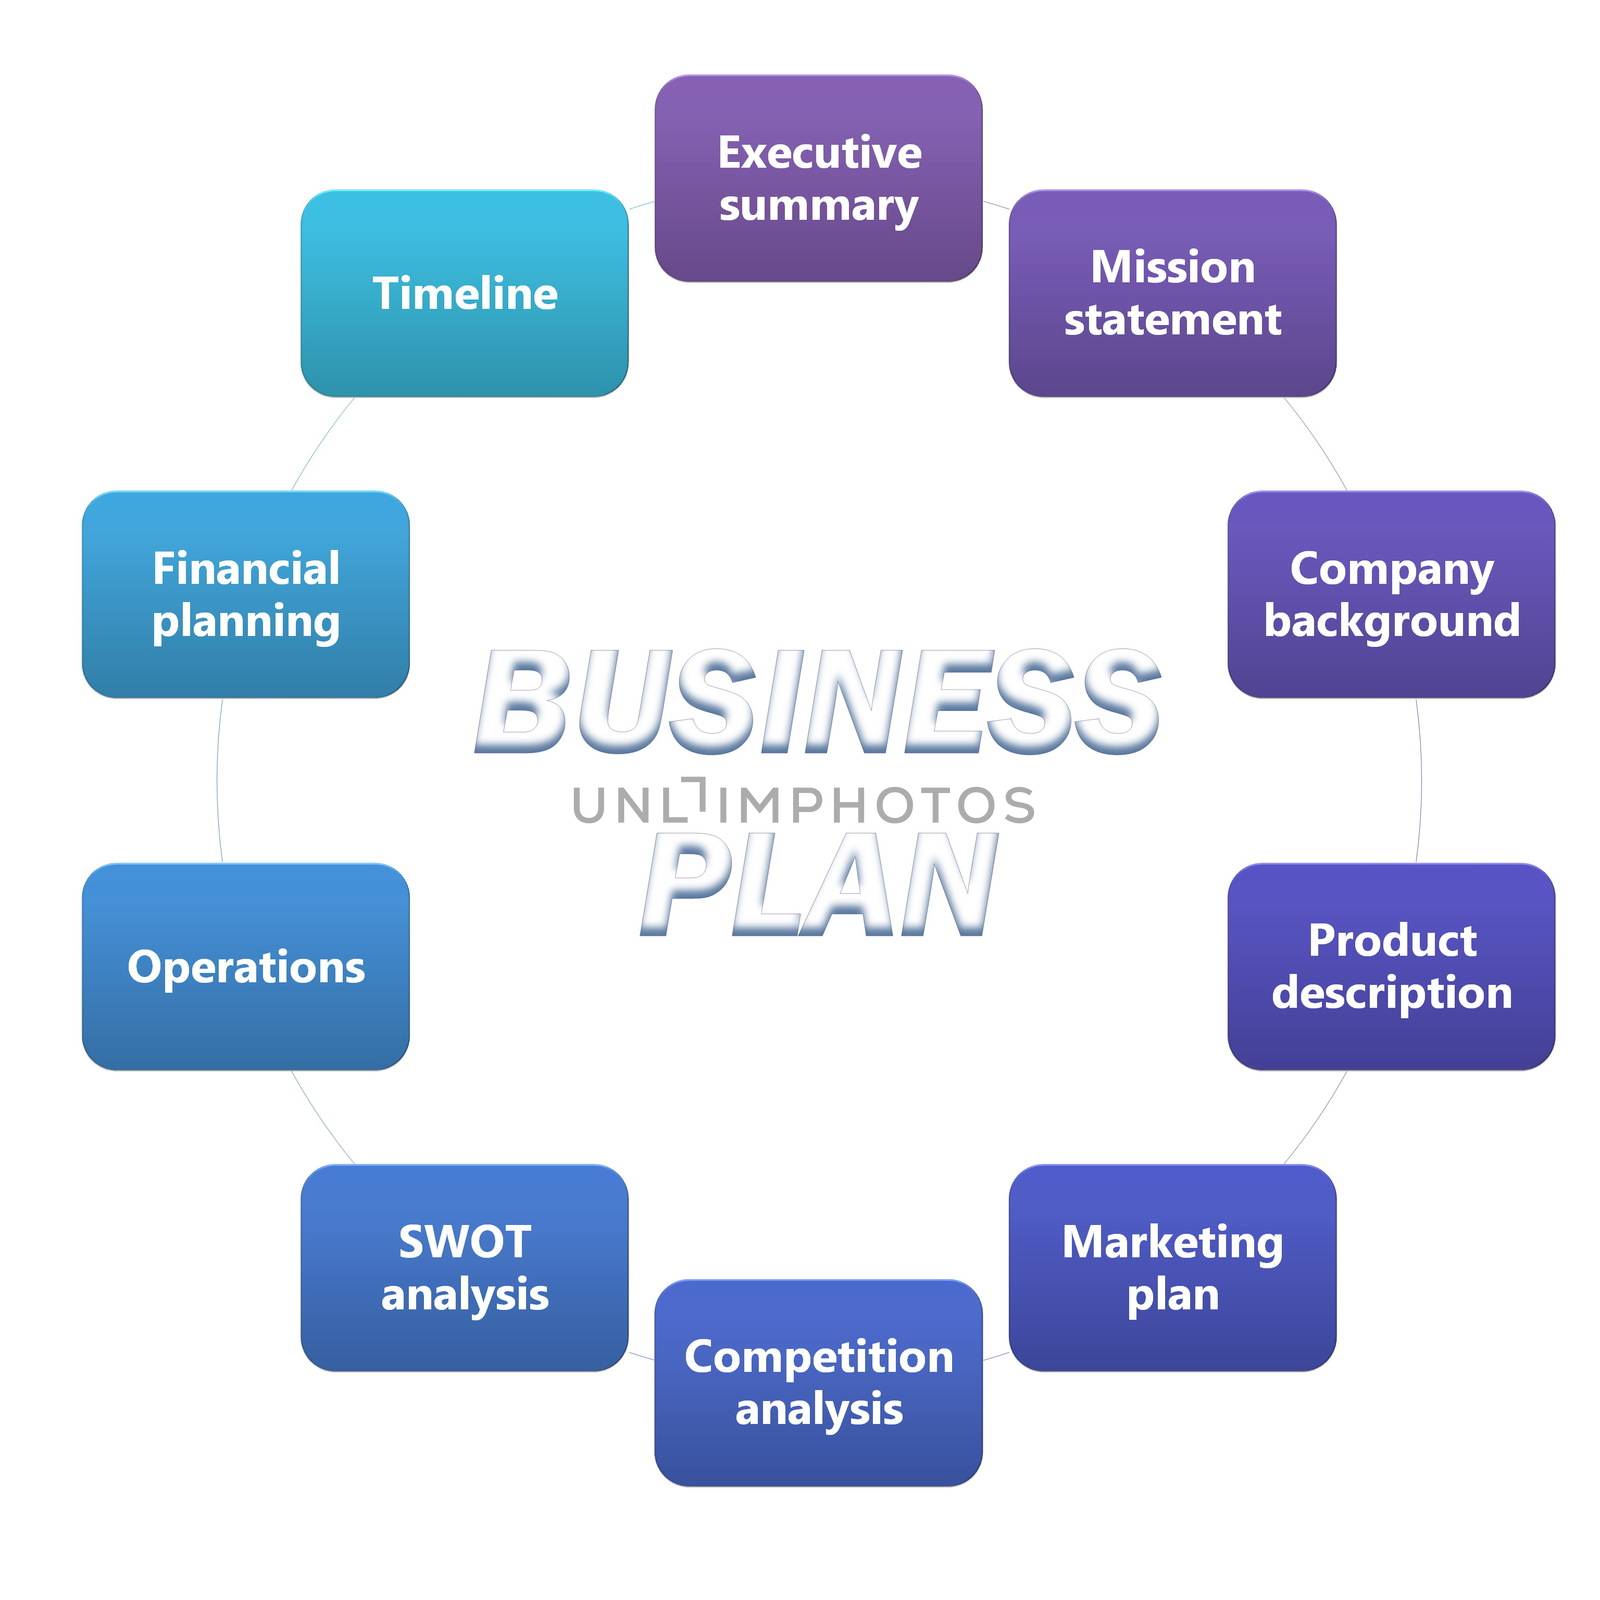 Detailed business plan diagram on white background